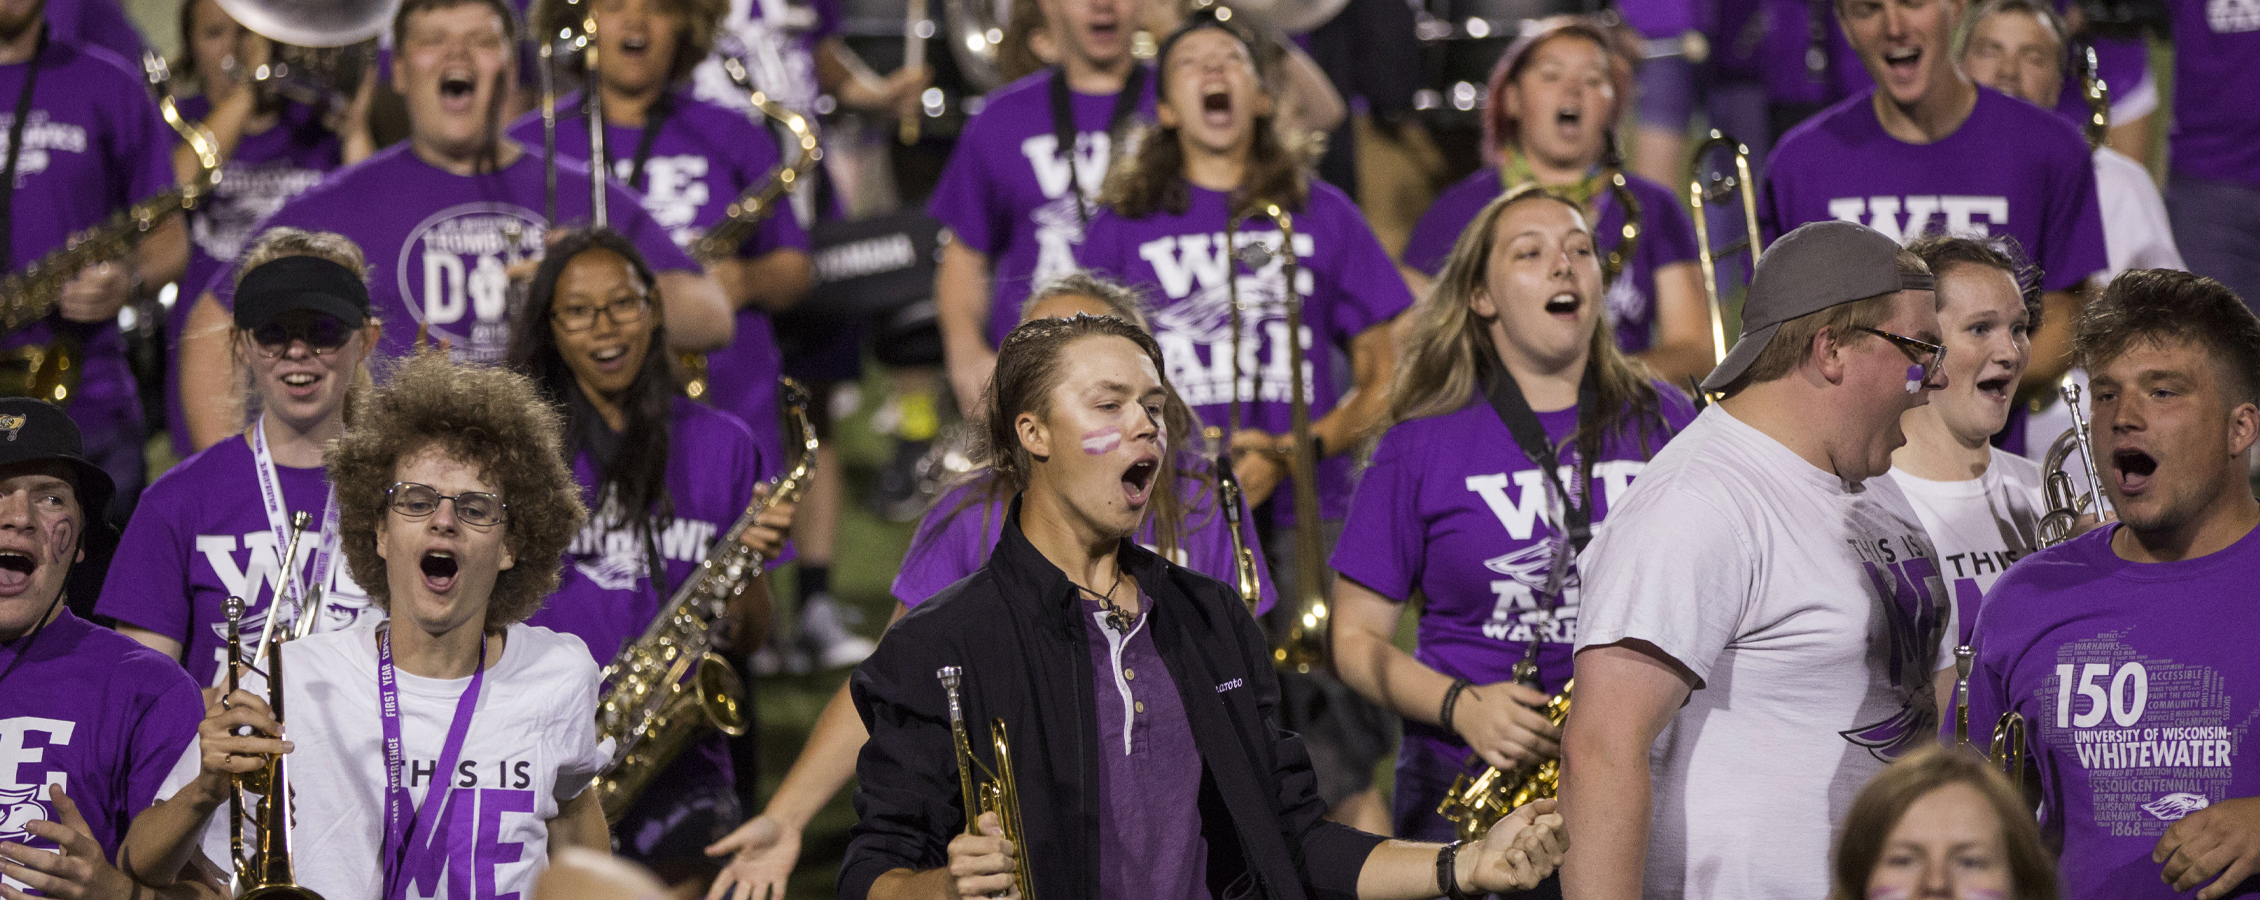 The Marching Band performs at RU Purple.